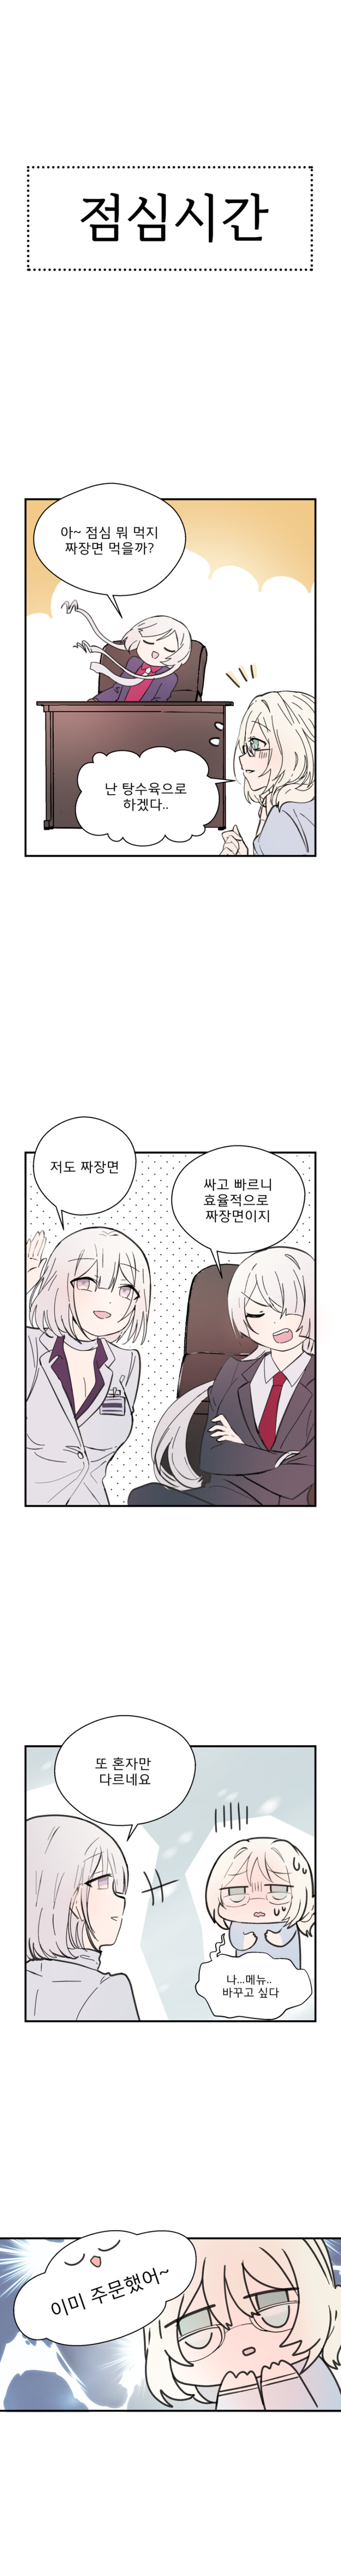 suit_출력_002.png